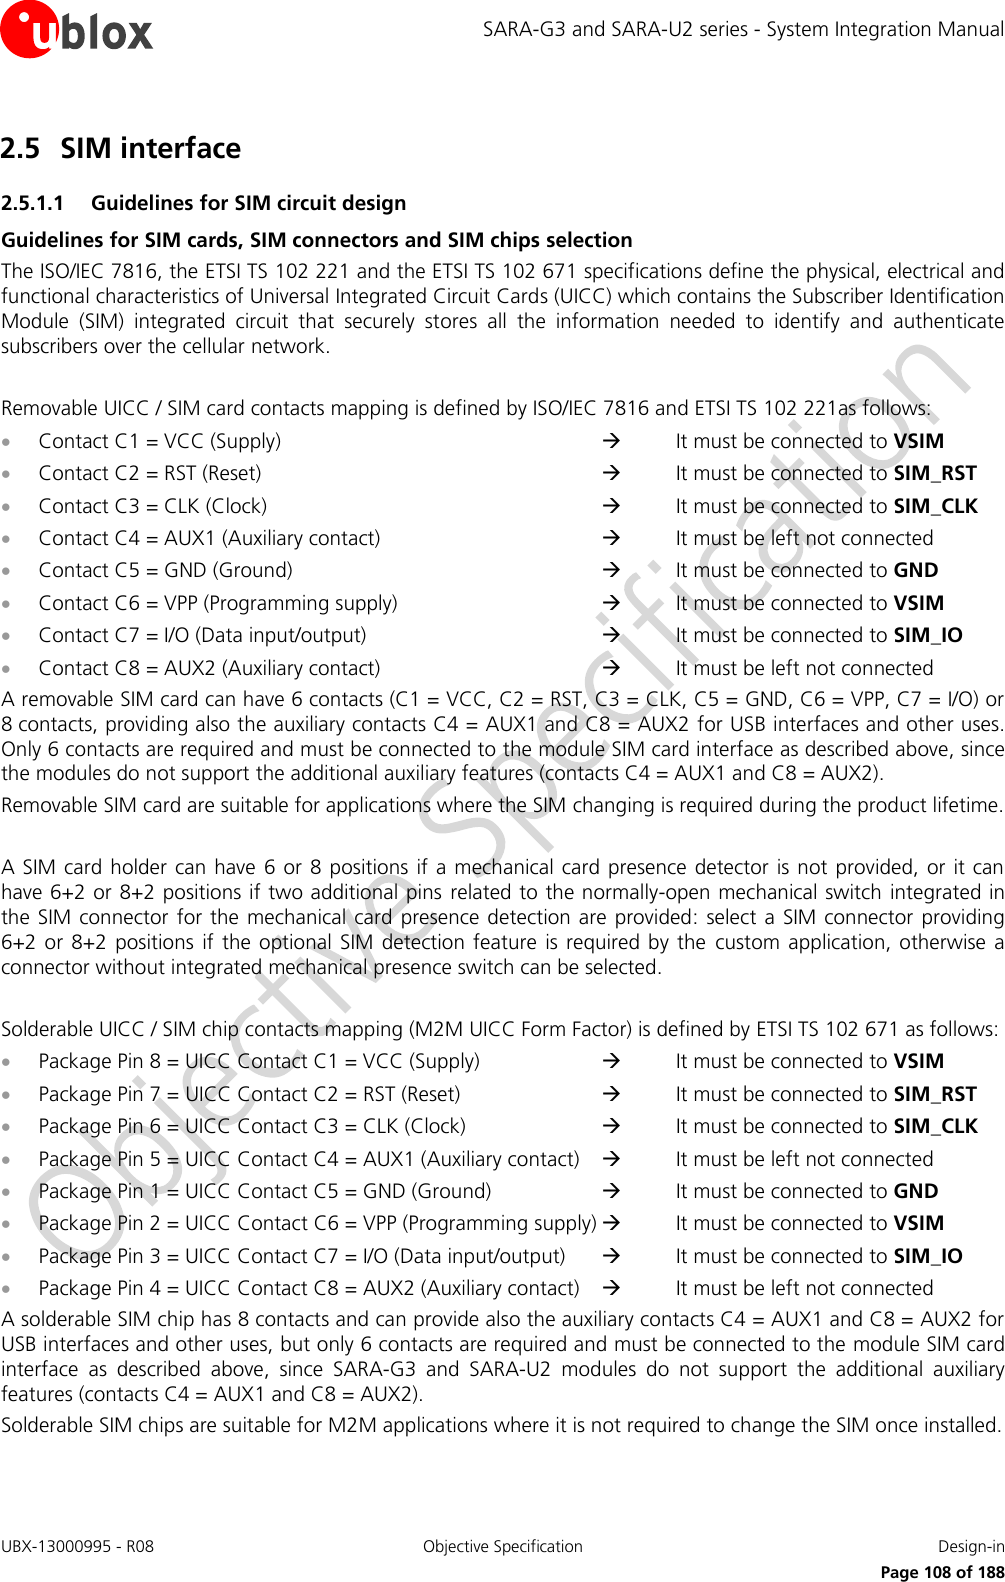 SARA-G3 and SARA-U2 series - System Integration Manual UBX-13000995 - R08  Objective Specification  Design-in     Page 108 of 188 2.5 SIM interface 2.5.1.1 Guidelines for SIM circuit design Guidelines for SIM cards, SIM connectors and SIM chips selection The ISO/IEC 7816, the ETSI TS 102 221 and the ETSI TS 102 671 specifications define the physical, electrical and functional characteristics of Universal Integrated Circuit Cards (UICC) which contains the Subscriber Identification Module  (SIM)  integrated  circuit  that  securely  stores  all  the  information  needed  to  identify  and  authenticate subscribers over the cellular network.  Removable UICC / SIM card contacts mapping is defined by ISO/IEC 7816 and ETSI TS 102 221as follows:  Contact C1 = VCC (Supply)              It must be connected to VSIM  Contact C2 = RST (Reset)              It must be connected to SIM_RST  Contact C3 = CLK (Clock)              It must be connected to SIM_CLK  Contact C4 = AUX1 (Auxiliary contact)         It must be left not connected  Contact C5 = GND (Ground)            It must be connected to GND  Contact C6 = VPP (Programming supply)         It must be connected to VSIM  Contact C7 = I/O (Data input/output)          It must be connected to SIM_IO  Contact C8 = AUX2 (Auxiliary contact)         It must be left not connected A removable SIM card can have 6 contacts (C1 = VCC, C2 = RST, C3 = CLK, C5 = GND, C6 = VPP, C7 = I/O) or 8 contacts, providing also the auxiliary contacts C4 = AUX1 and C8 = AUX2 for USB interfaces and other uses. Only 6 contacts are required and must be connected to the module SIM card interface as described above, since the modules do not support the additional auxiliary features (contacts C4 = AUX1 and C8 = AUX2). Removable SIM card are suitable for applications where the SIM changing is required during the product lifetime.  A SIM card holder can have 6 or 8  positions if  a mechanical  card presence  detector is not provided,  or it can have 6+2 or 8+2 positions if two additional pins related to the normally-open mechanical switch integrated in the SIM  connector  for the mechanical  card presence detection are  provided:  select  a SIM connector  providing 6+2 or  8+2  positions  if the  optional SIM  detection  feature  is required  by the  custom  application,  otherwise a connector without integrated mechanical presence switch can be selected.  Solderable UICC / SIM chip contacts mapping (M2M UICC Form Factor) is defined by ETSI TS 102 671 as follows:  Package Pin 8 = UICC Contact C1 = VCC (Supply)        It must be connected to VSIM  Package Pin 7 = UICC Contact C2 = RST (Reset)        It must be connected to SIM_RST  Package Pin 6 = UICC Contact C3 = CLK (Clock)        It must be connected to SIM_CLK  Package Pin 5 = UICC Contact C4 = AUX1 (Auxiliary contact)      It must be left not connected  Package Pin 1 = UICC Contact C5 = GND (Ground)       It must be connected to GND  Package Pin 2 = UICC Contact C6 = VPP (Programming supply)   It must be connected to VSIM  Package Pin 3 = UICC Contact C7 = I/O (Data input/output)      It must be connected to SIM_IO  Package Pin 4 = UICC Contact C8 = AUX2 (Auxiliary contact)      It must be left not connected A solderable SIM chip has 8 contacts and can provide also the auxiliary contacts C4 = AUX1 and C8 = AUX2 for USB interfaces and other uses, but only 6 contacts are required and must be connected to the module SIM card interface  as  described  above,  since  SARA-G3  and  SARA-U2  modules  do  not  support  the  additional  auxiliary features (contacts C4 = AUX1 and C8 = AUX2). Solderable SIM chips are suitable for M2M applications where it is not required to change the SIM once installed. 